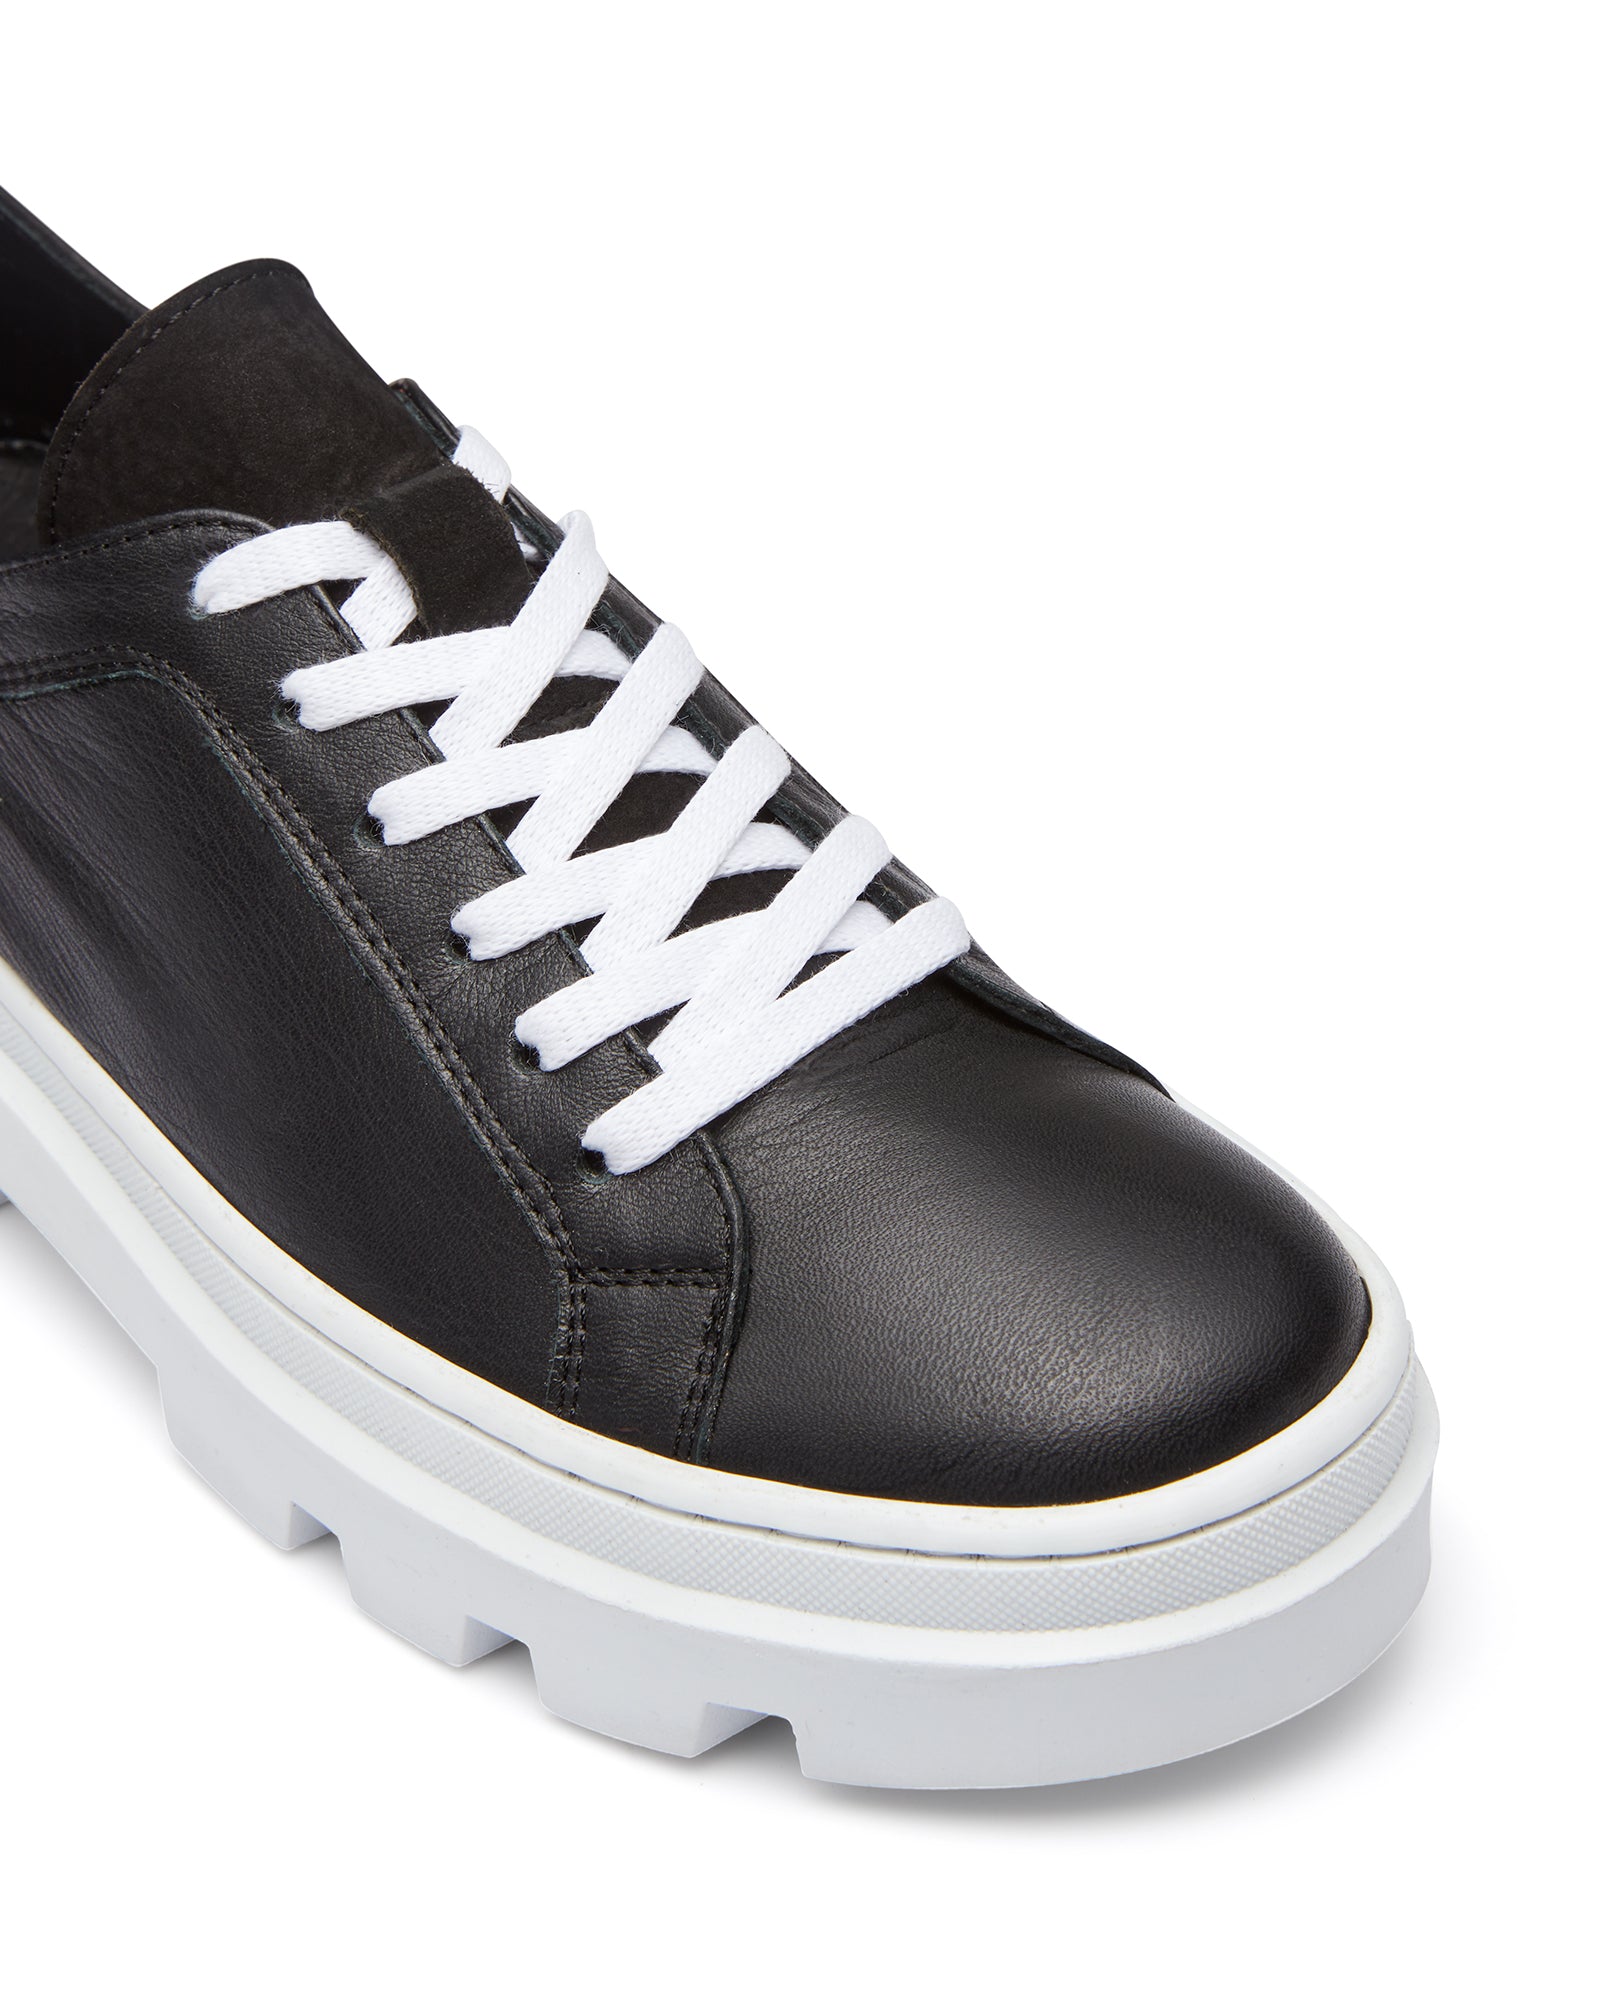 Just Because Shoes Patch Black | Leather Sneaker | Lace Up | Platform